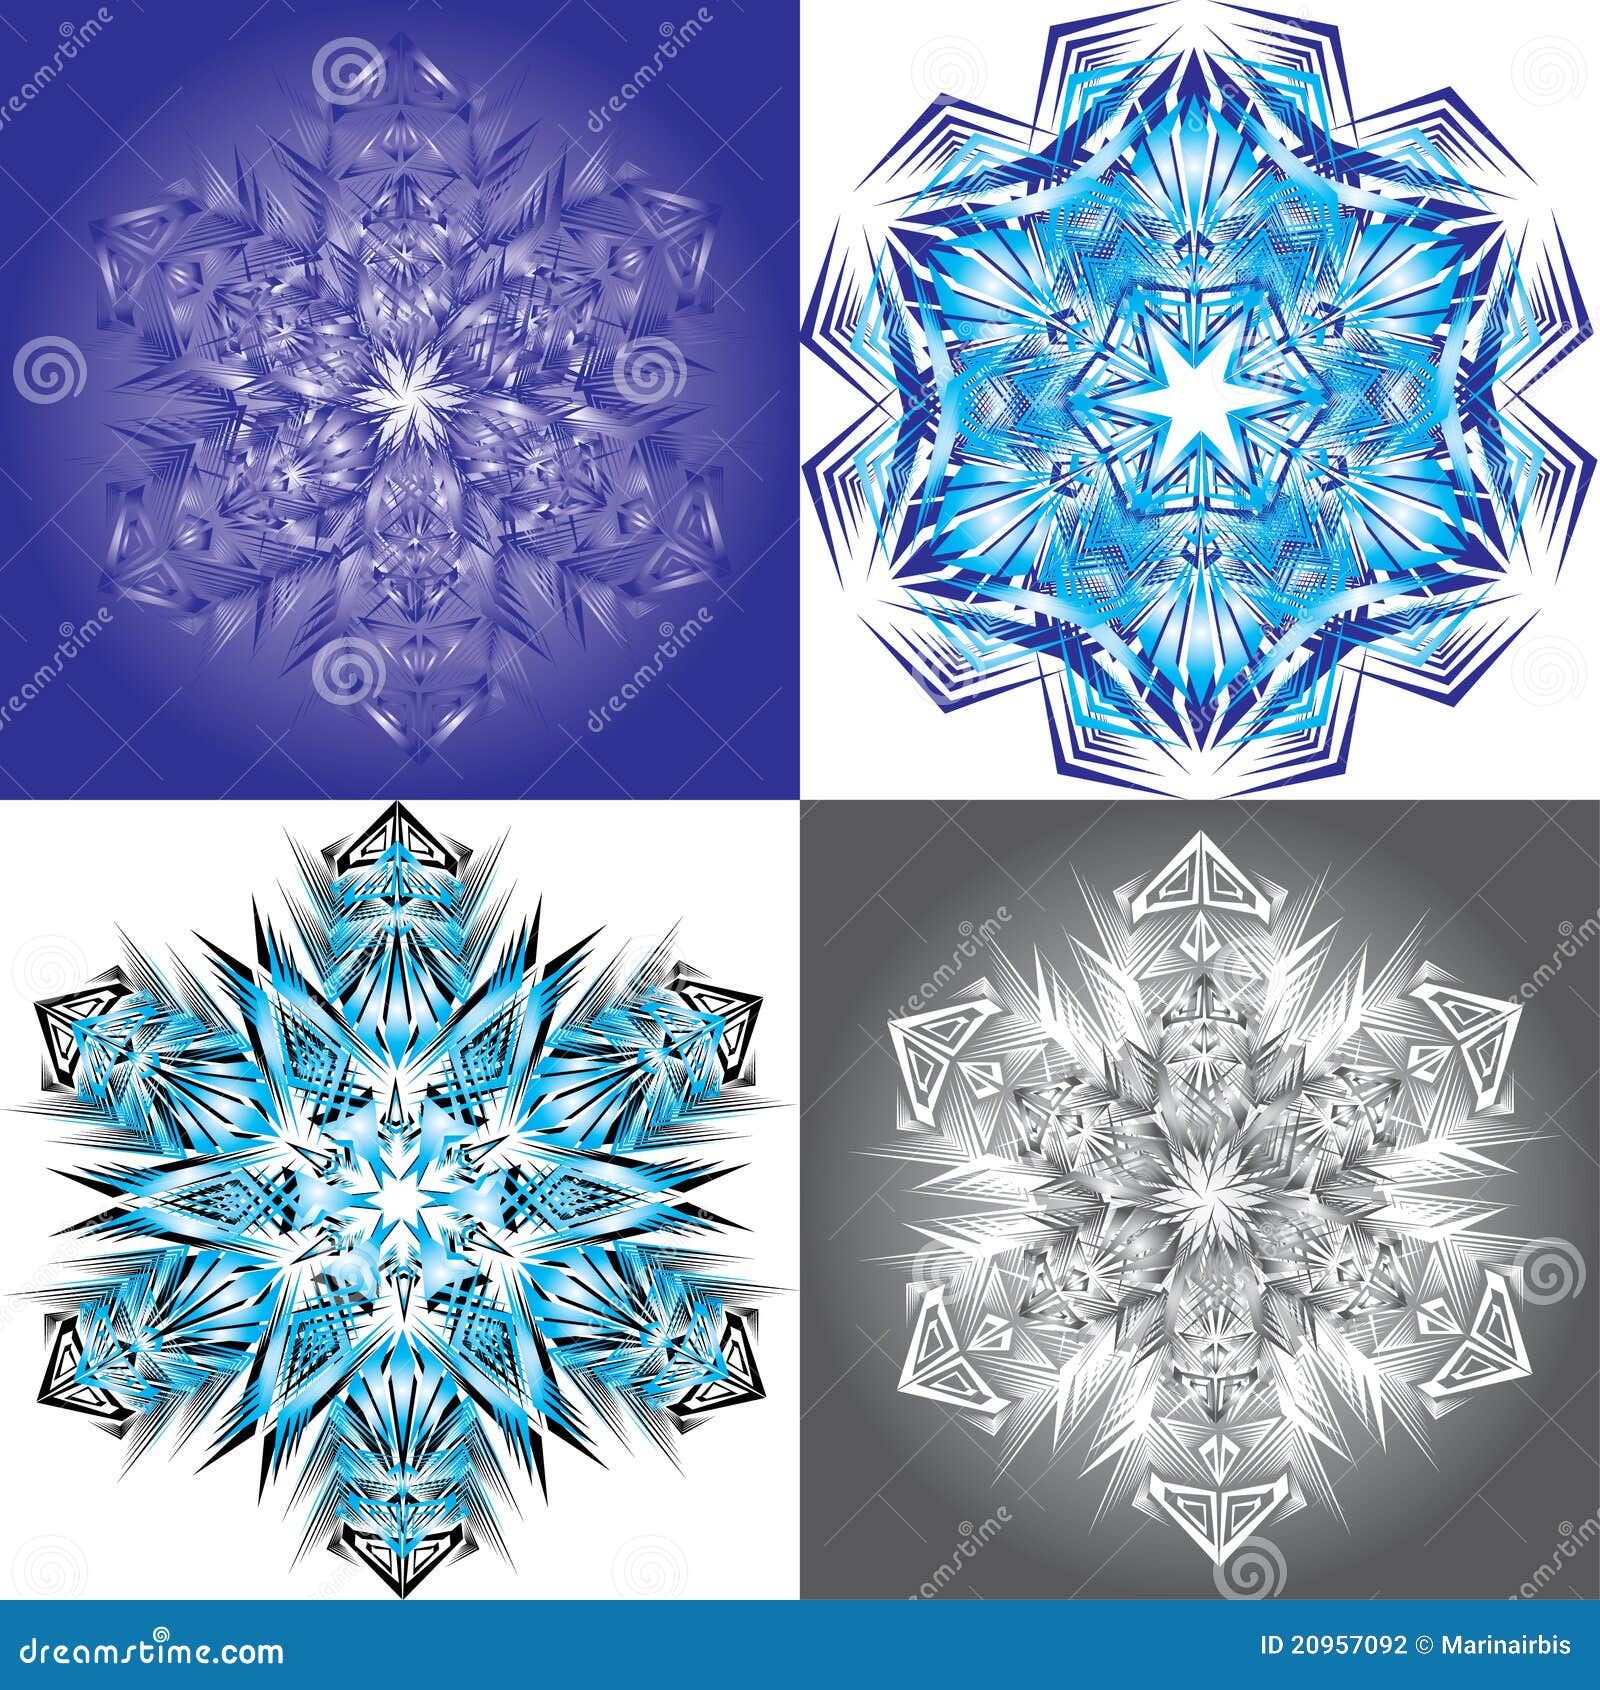 black fade out png snowflake